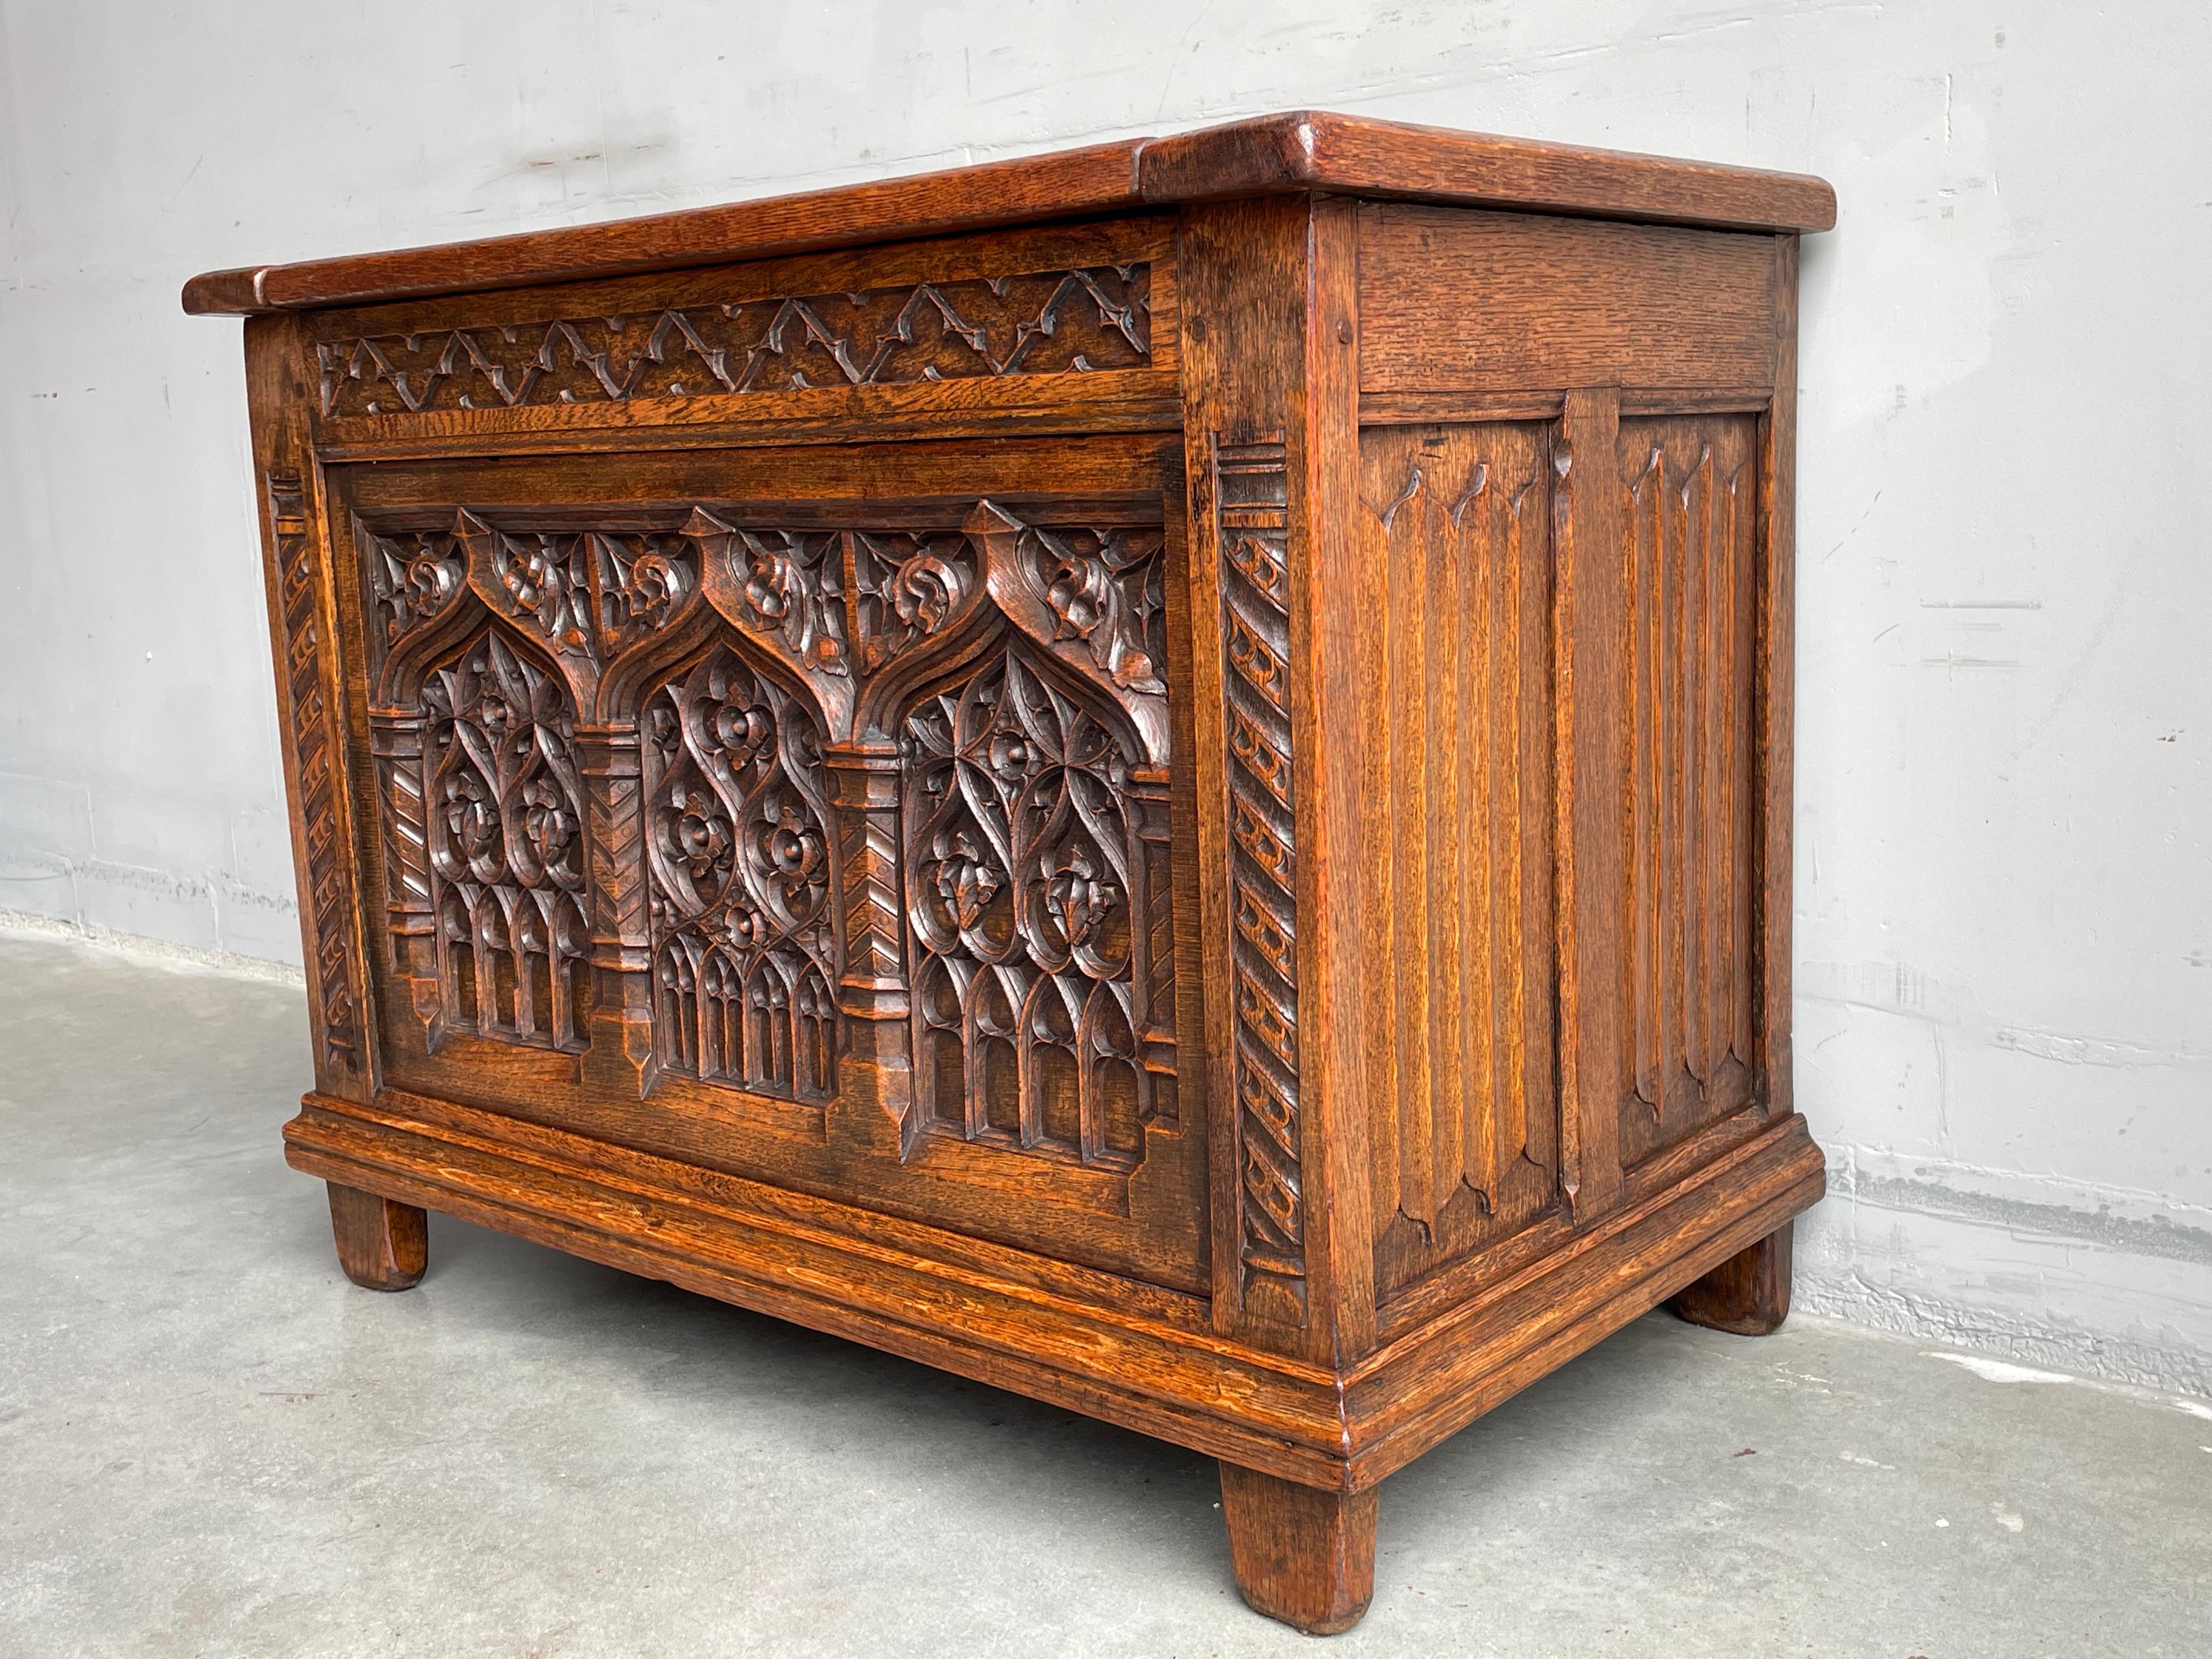 Rare Size Antique Gothic Revival Hand Carved Oak Chest / Trunk with Warm Patina 3